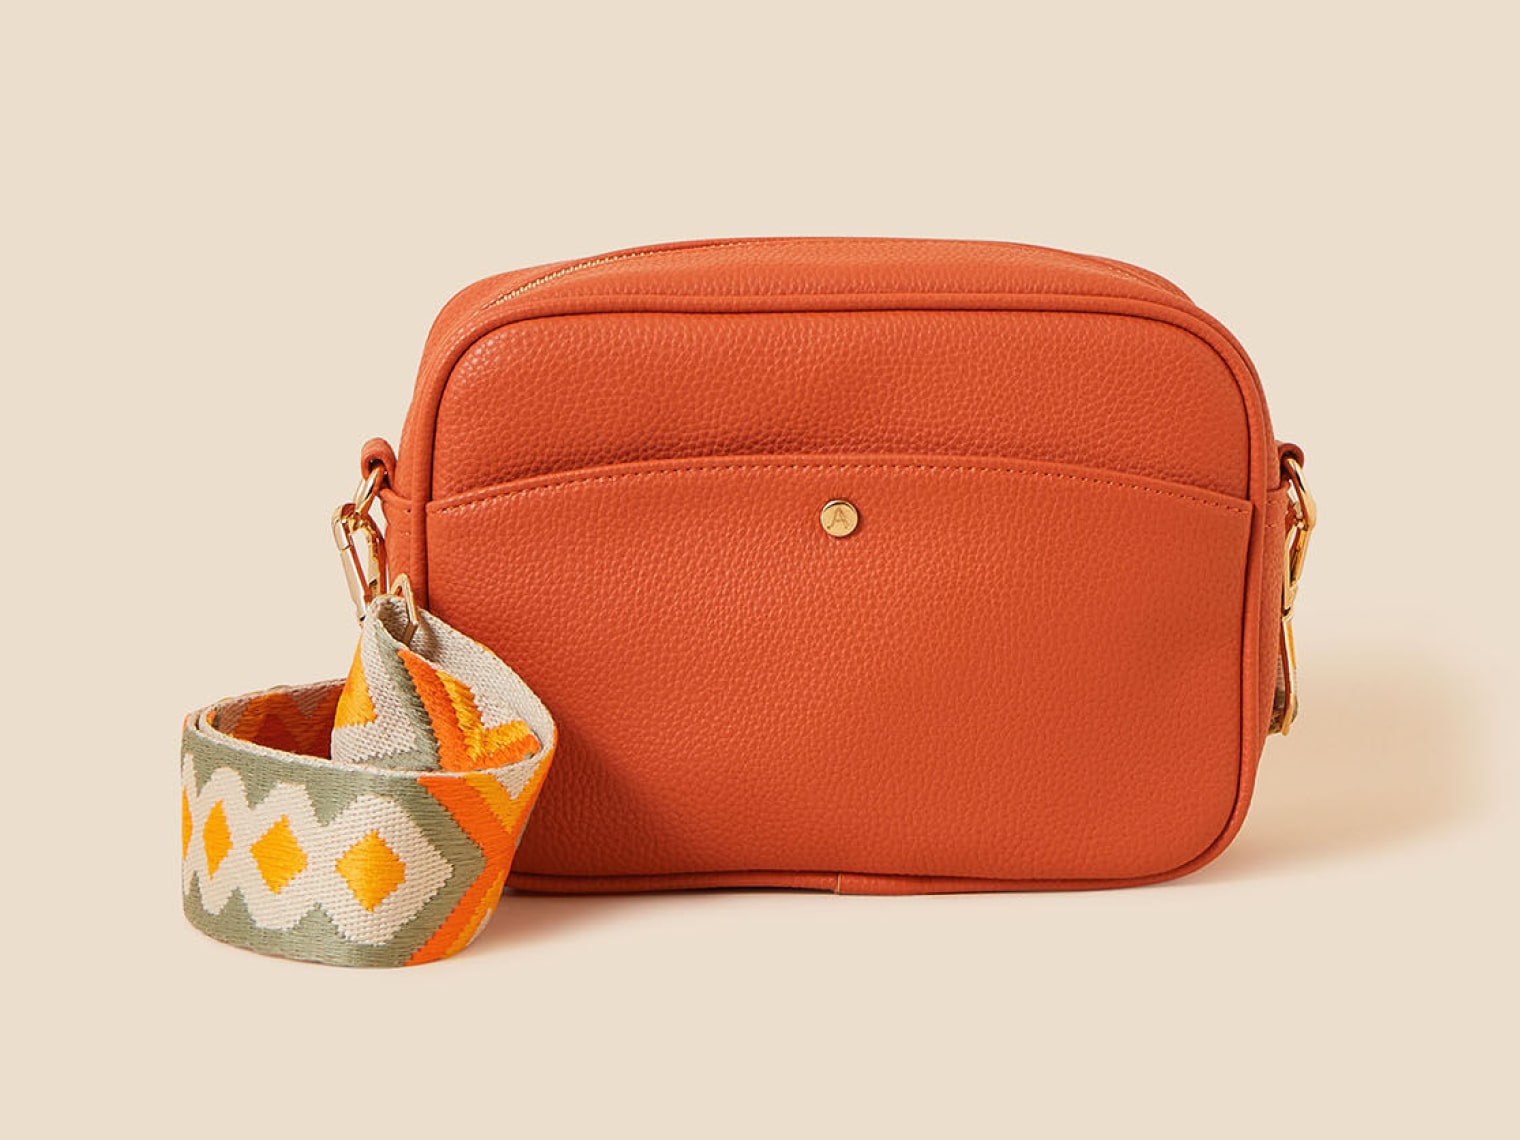 Make a statement with our eye-catching handbags